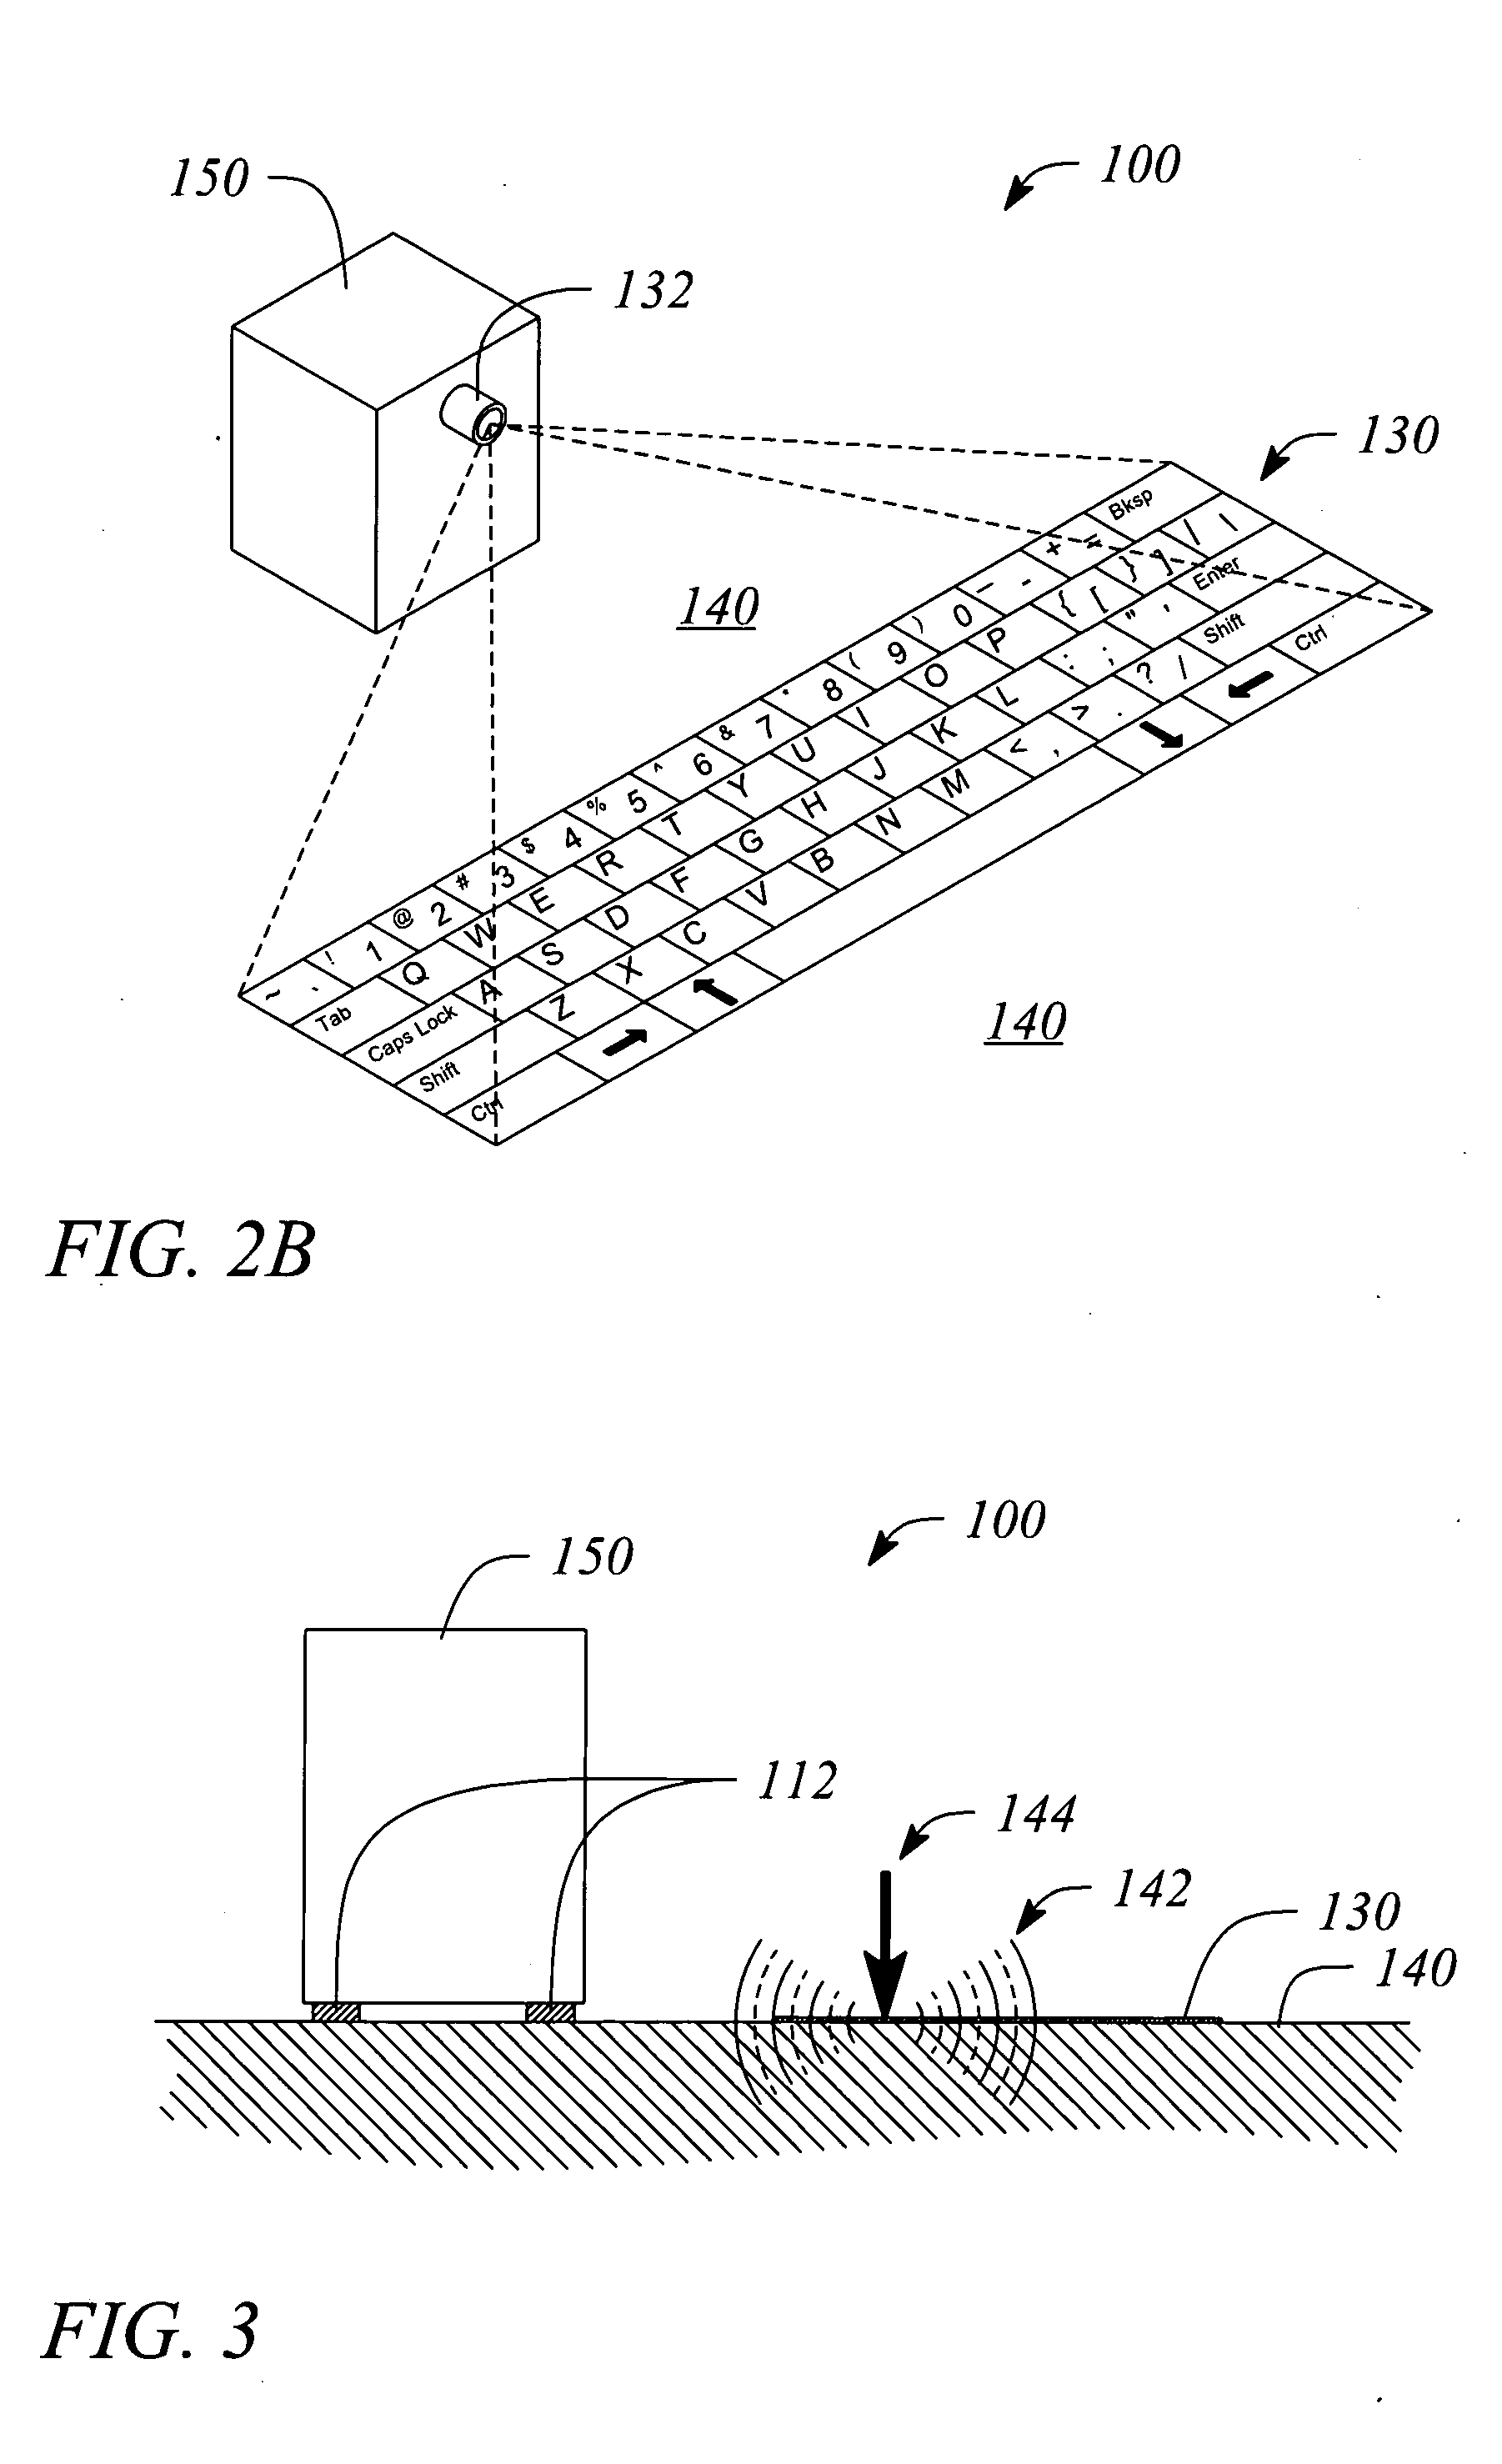 Sound-based virtual keyboard, device and method